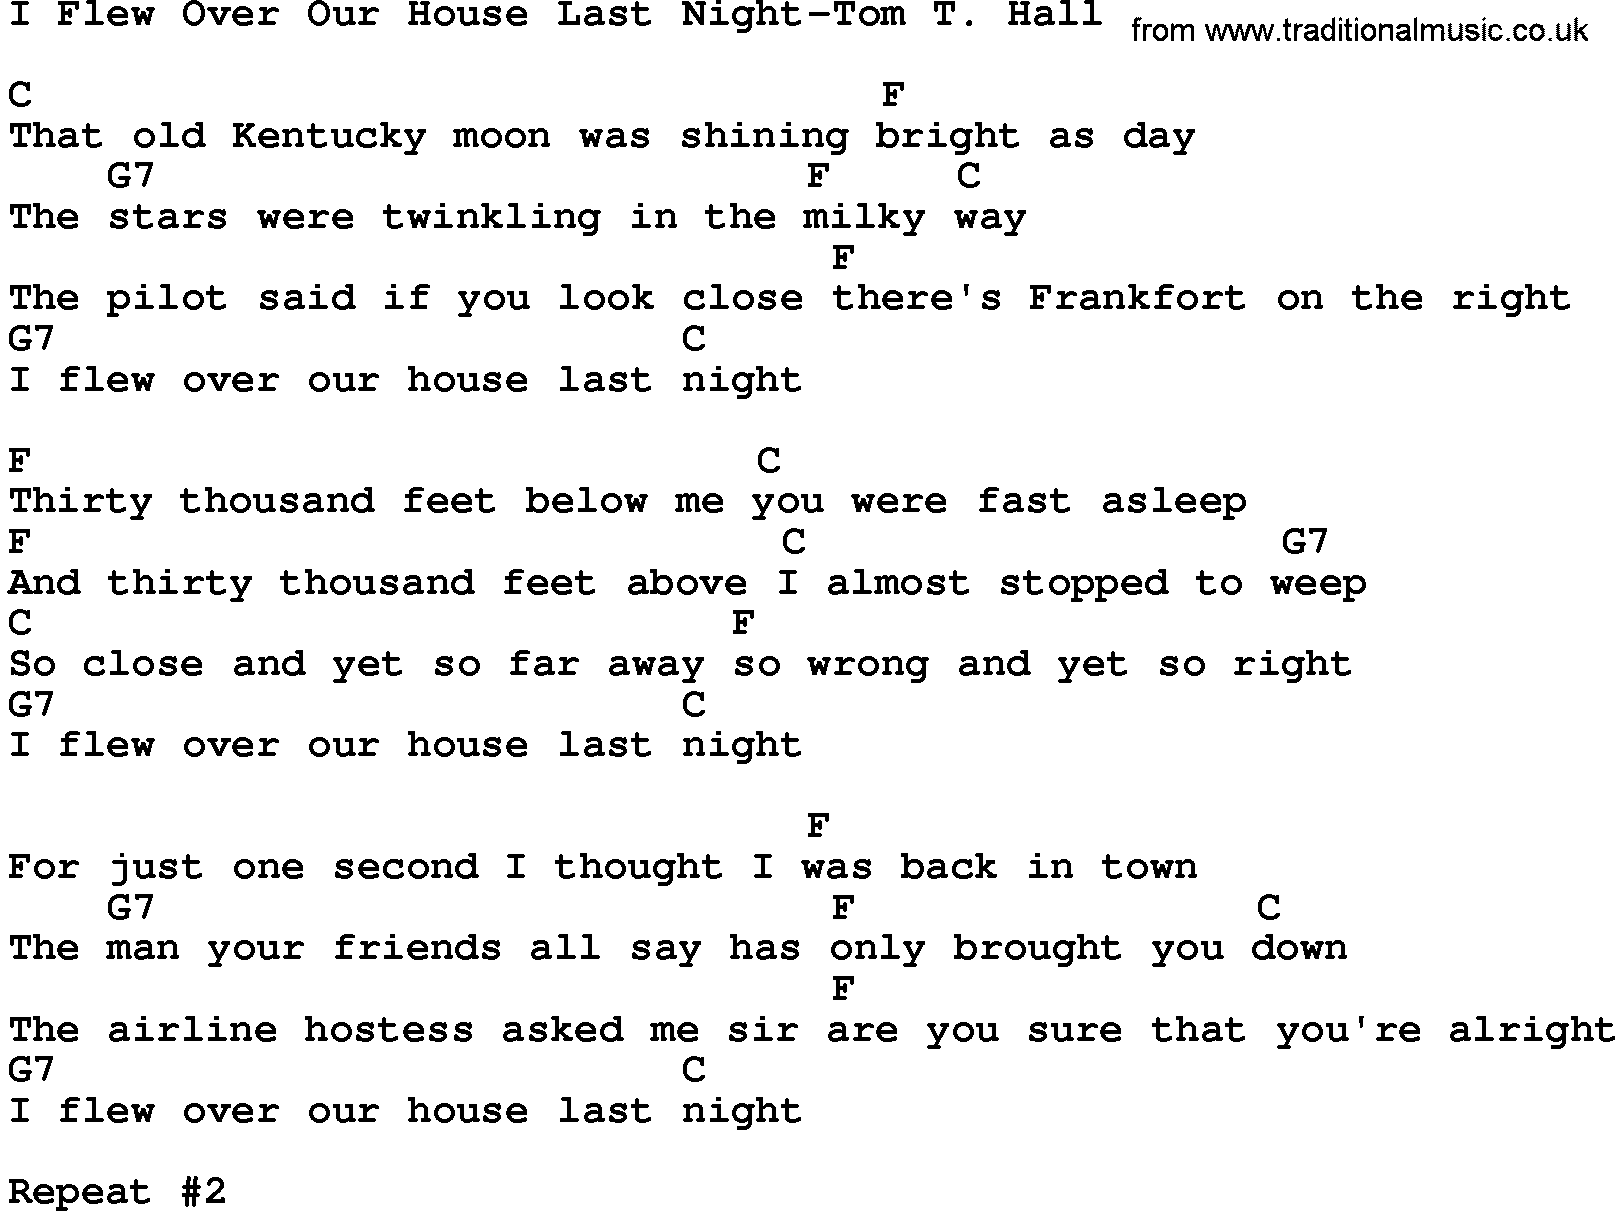 Country music song: I Flew Over Our House Last Night-Tom T Hall lyrics and chords